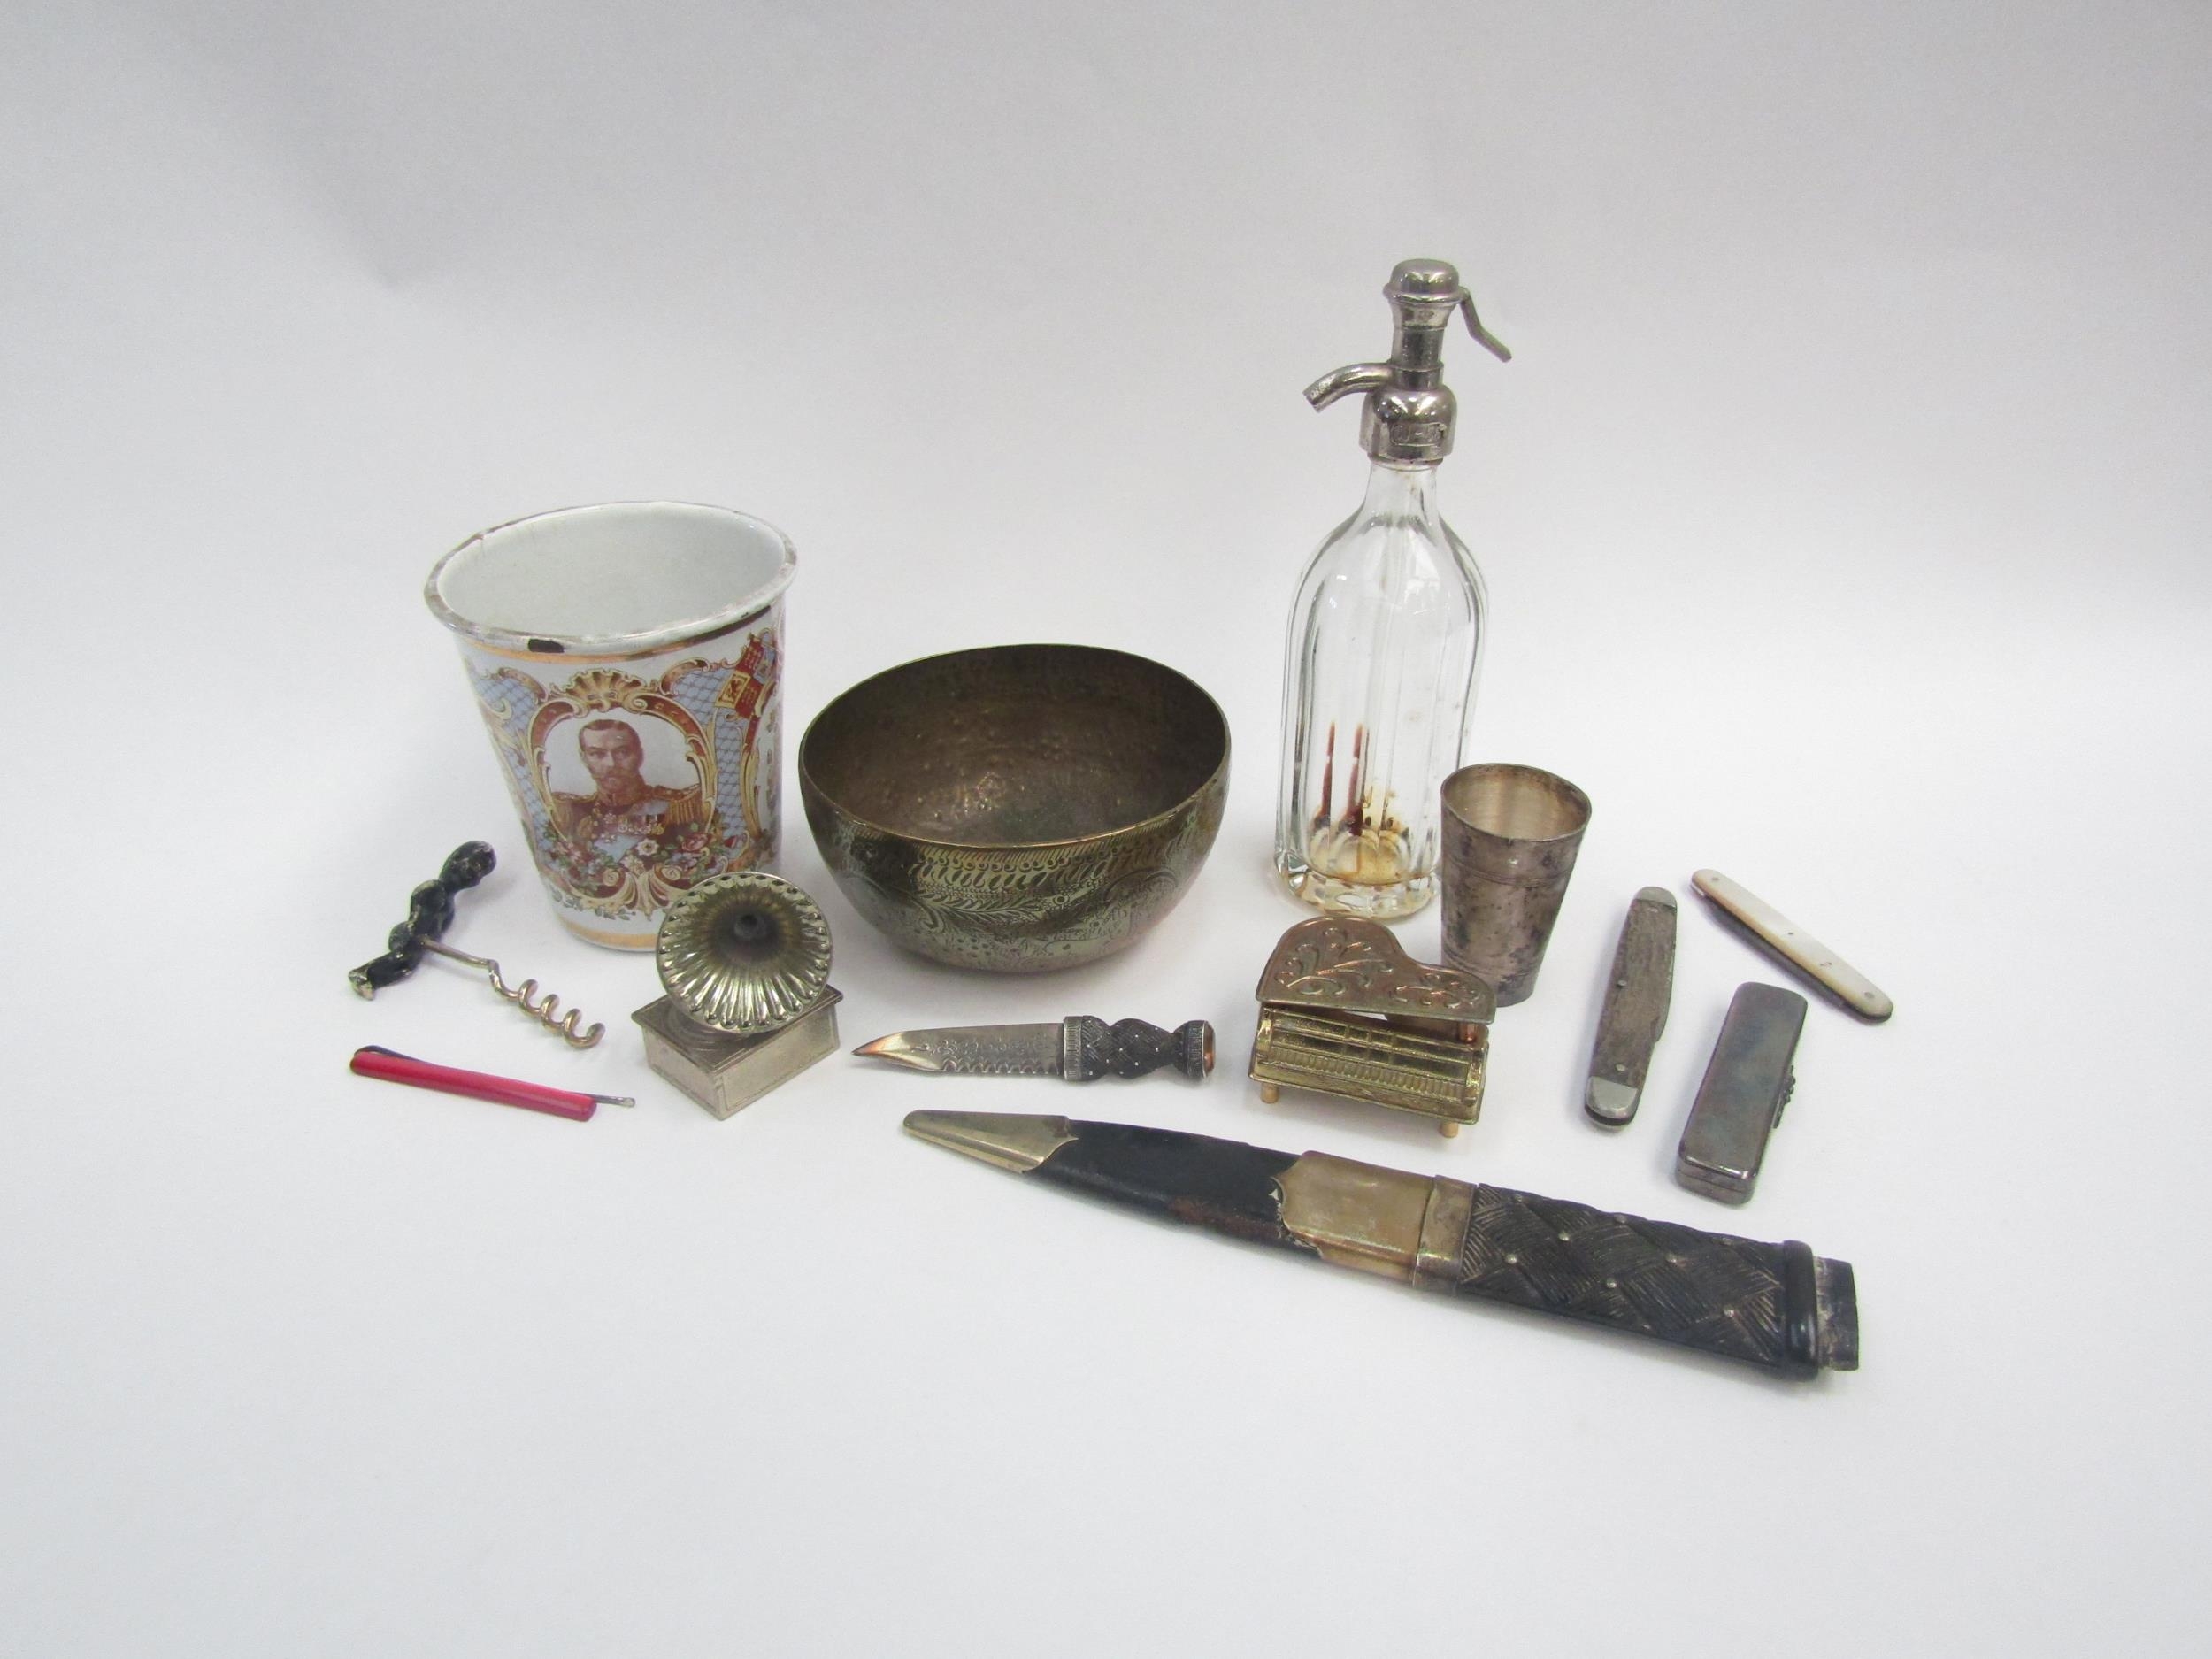 A selection of items including miniature items, penknives, corkscrew, soda siphon, Eastern brass